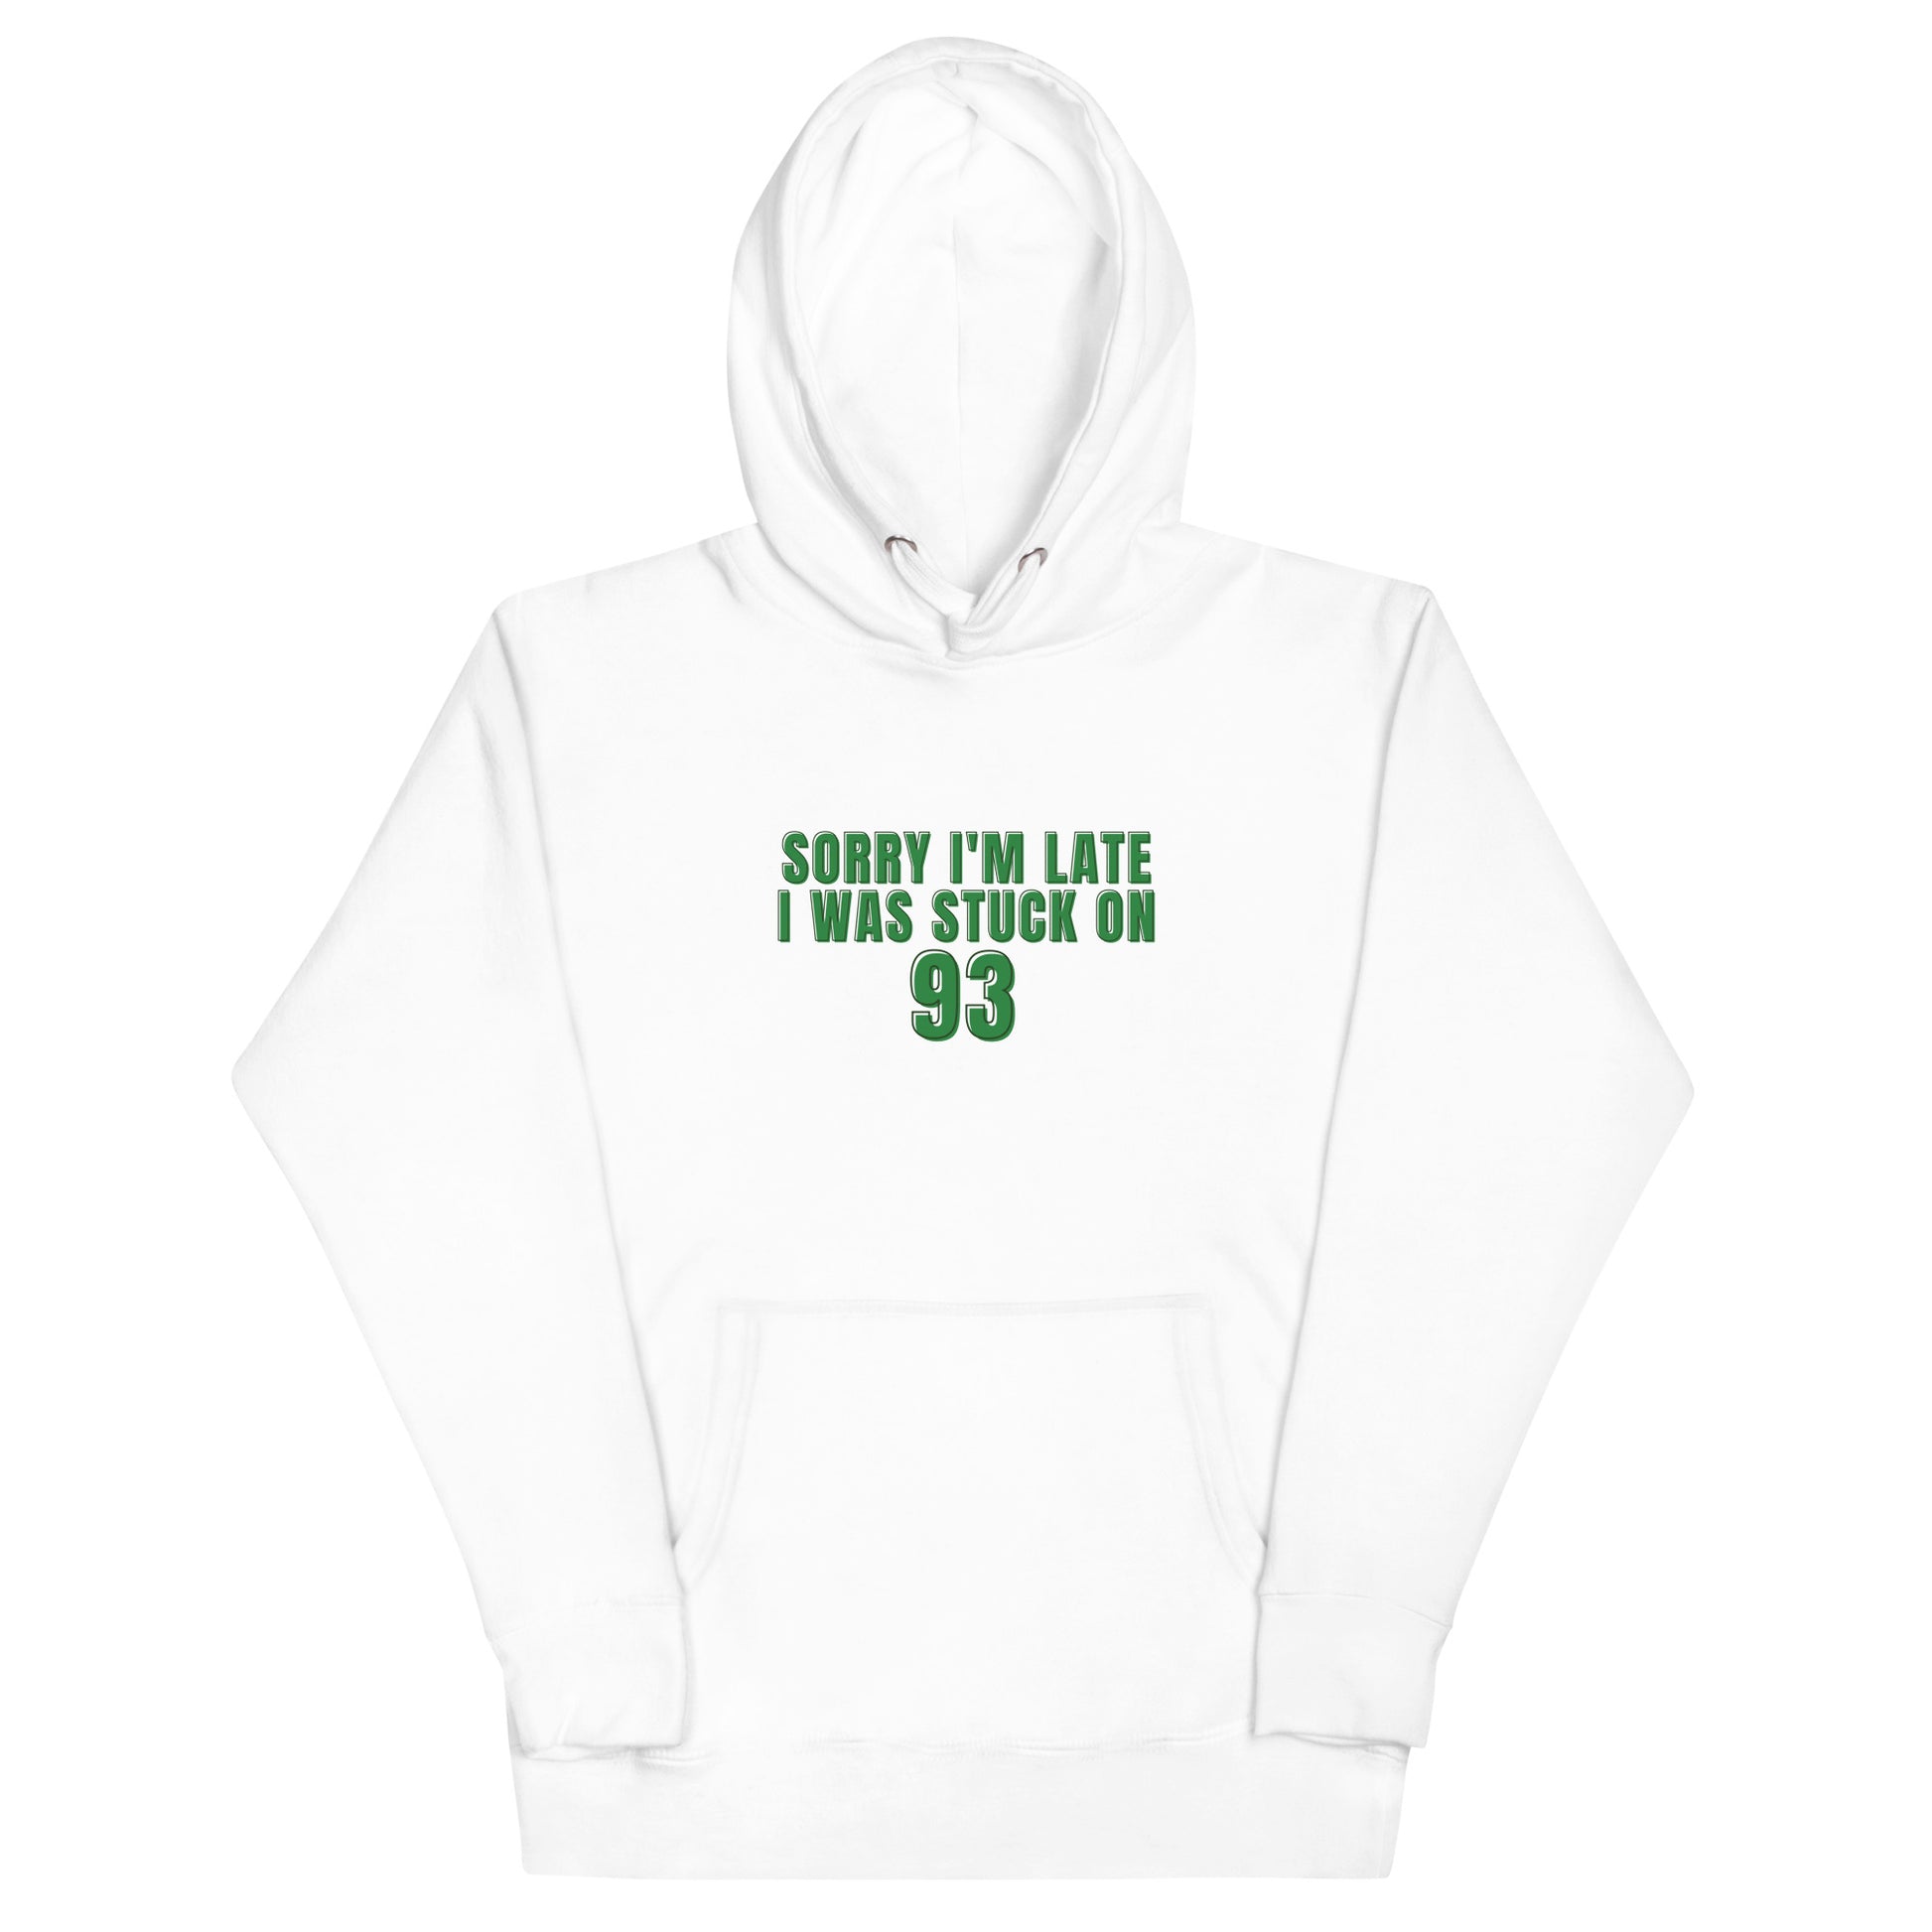 white hoodie that says "sorry i'm late i was stuck on 93" in green lettering